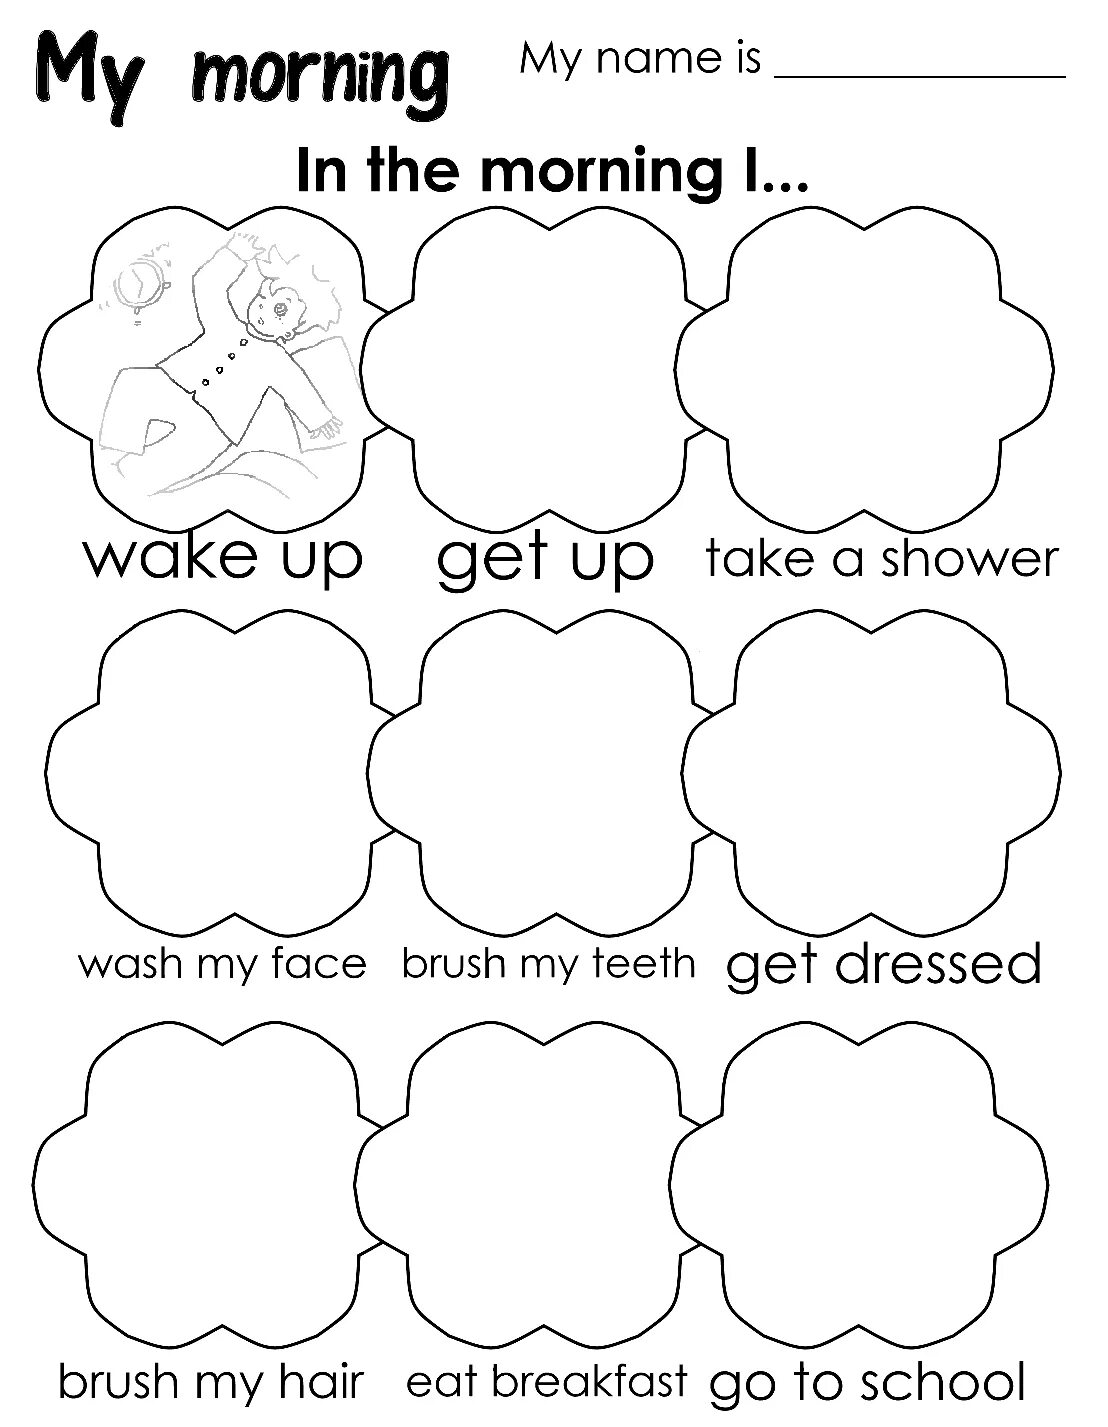 Задания Daily Routine for Kids. Daily Routine Worksheets for Kids. Daily Routine задания. Routine Worksheets.